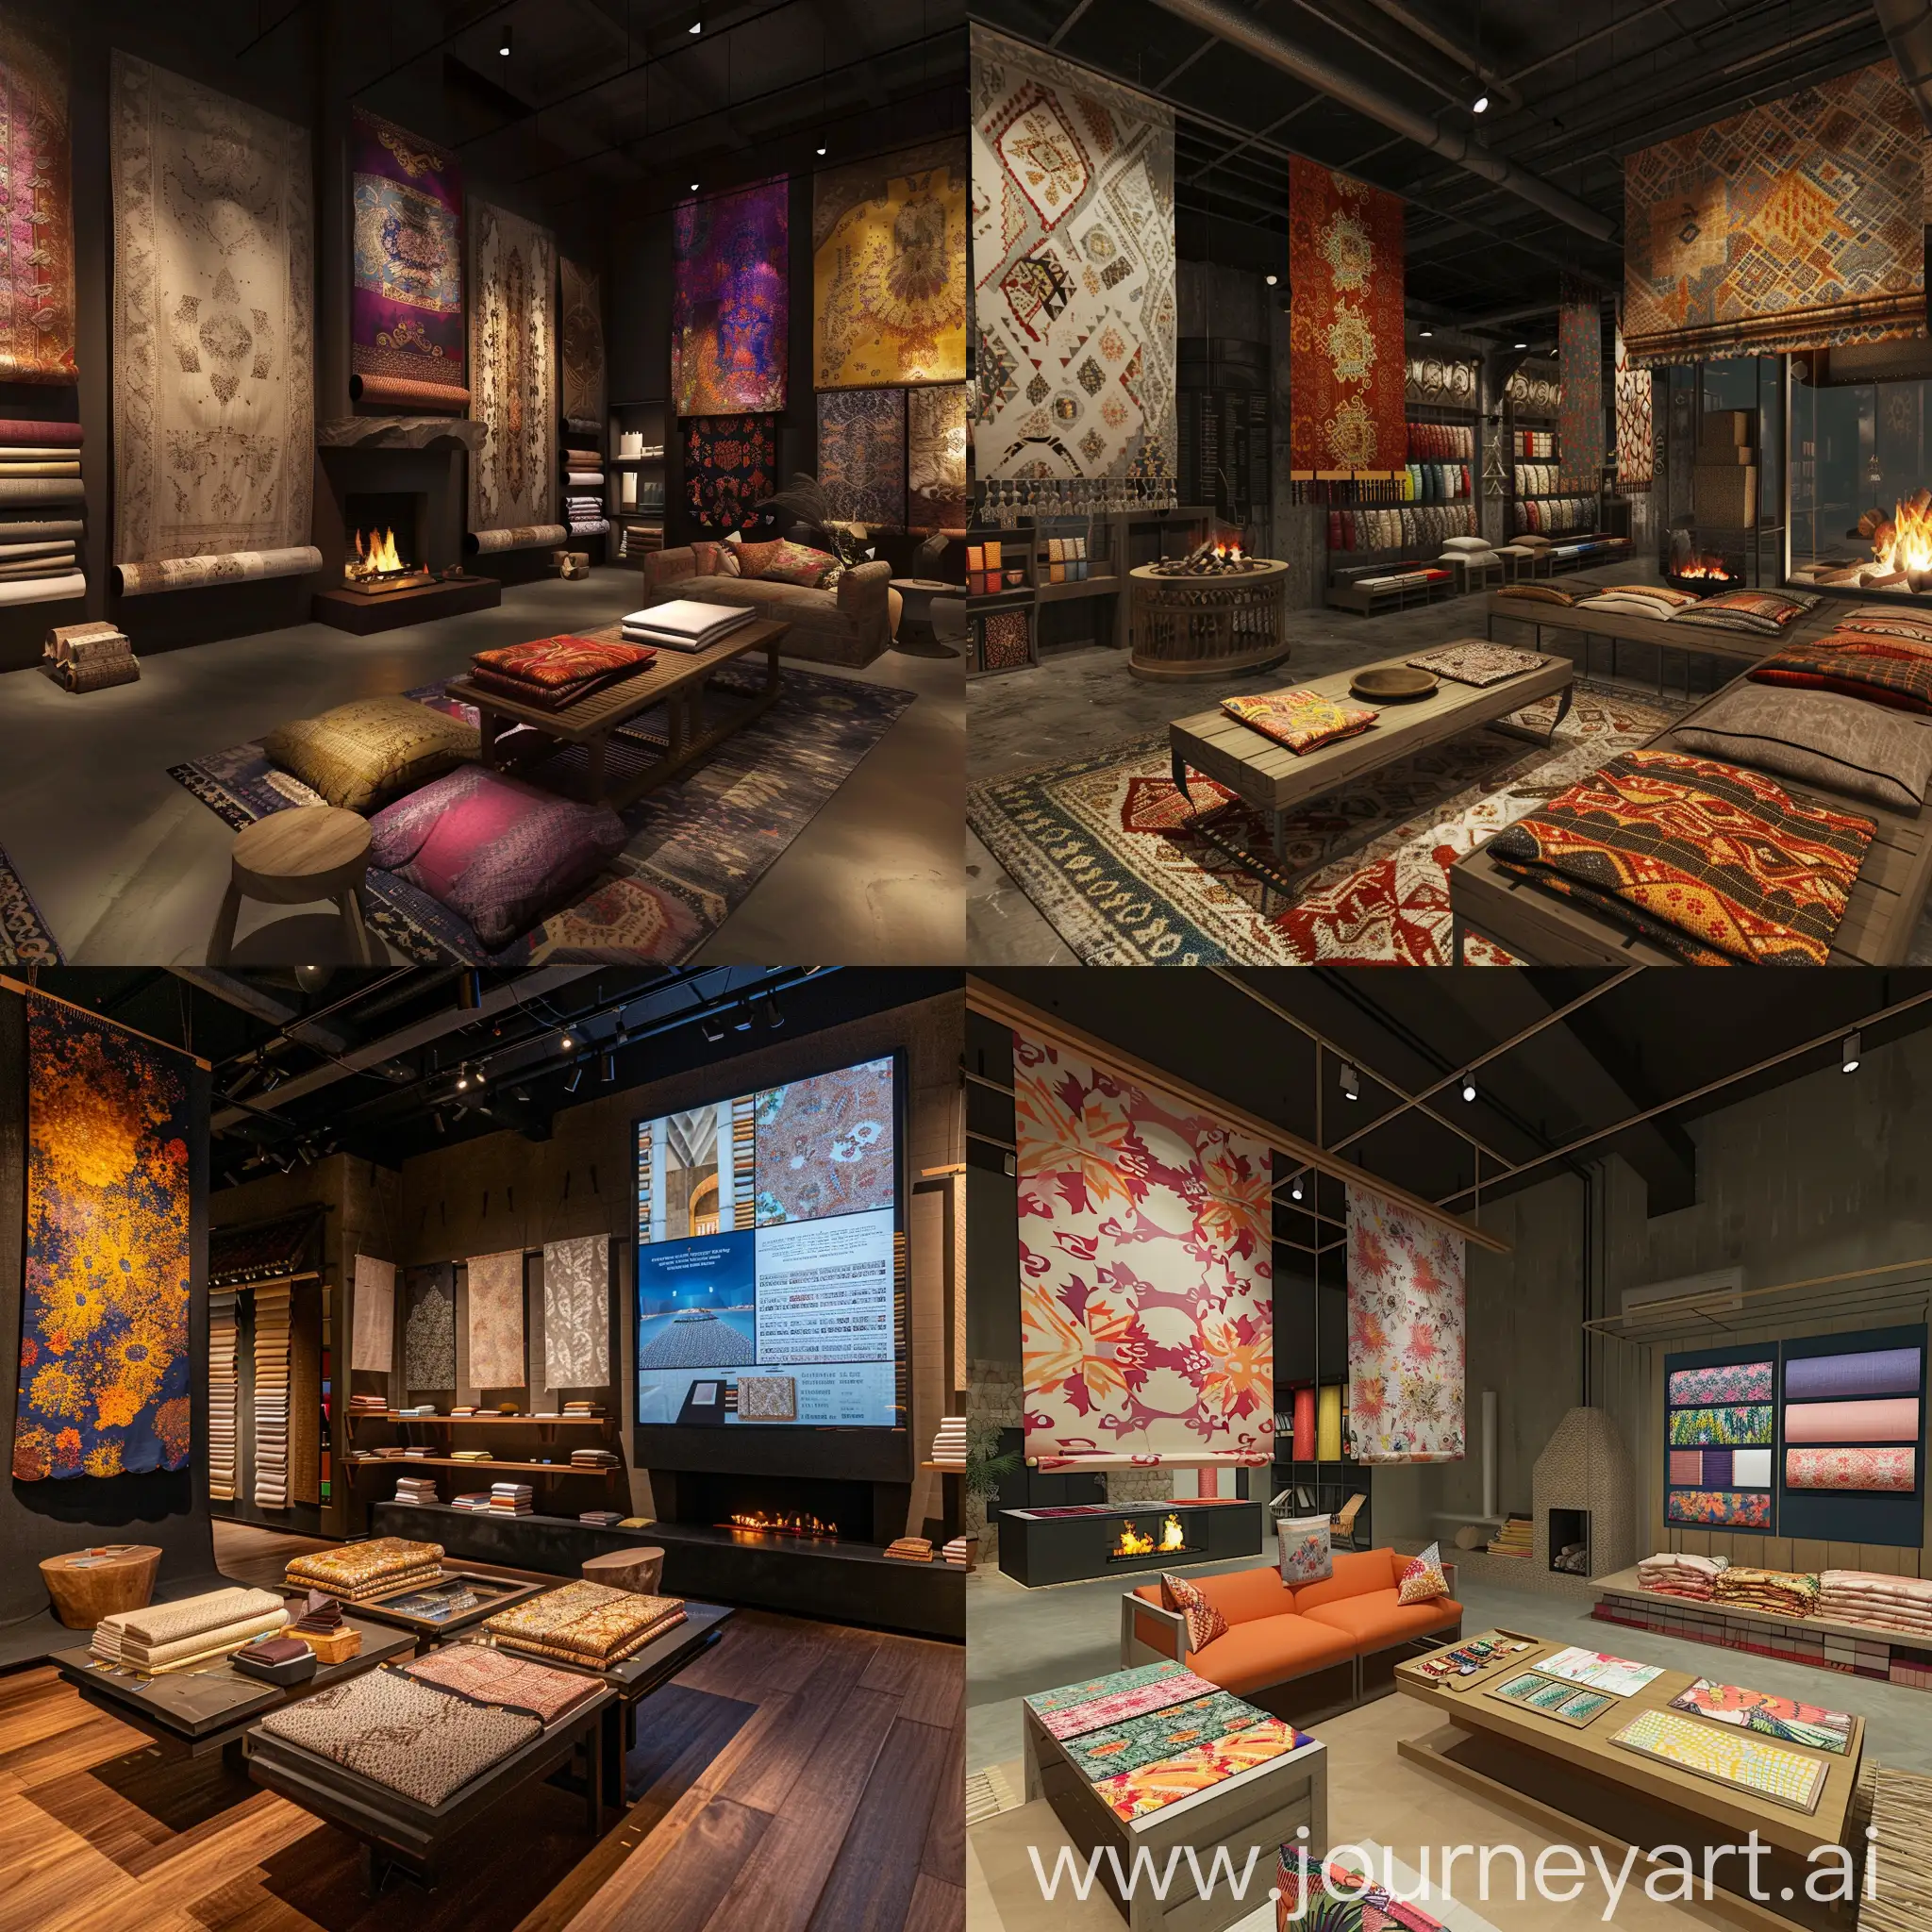 fabri shorwroom interior inspired by indonesian culture mix with modern, with hang display, seating area, display table, fire place, samples display, and fabric virtual visualisation screen on the wall.